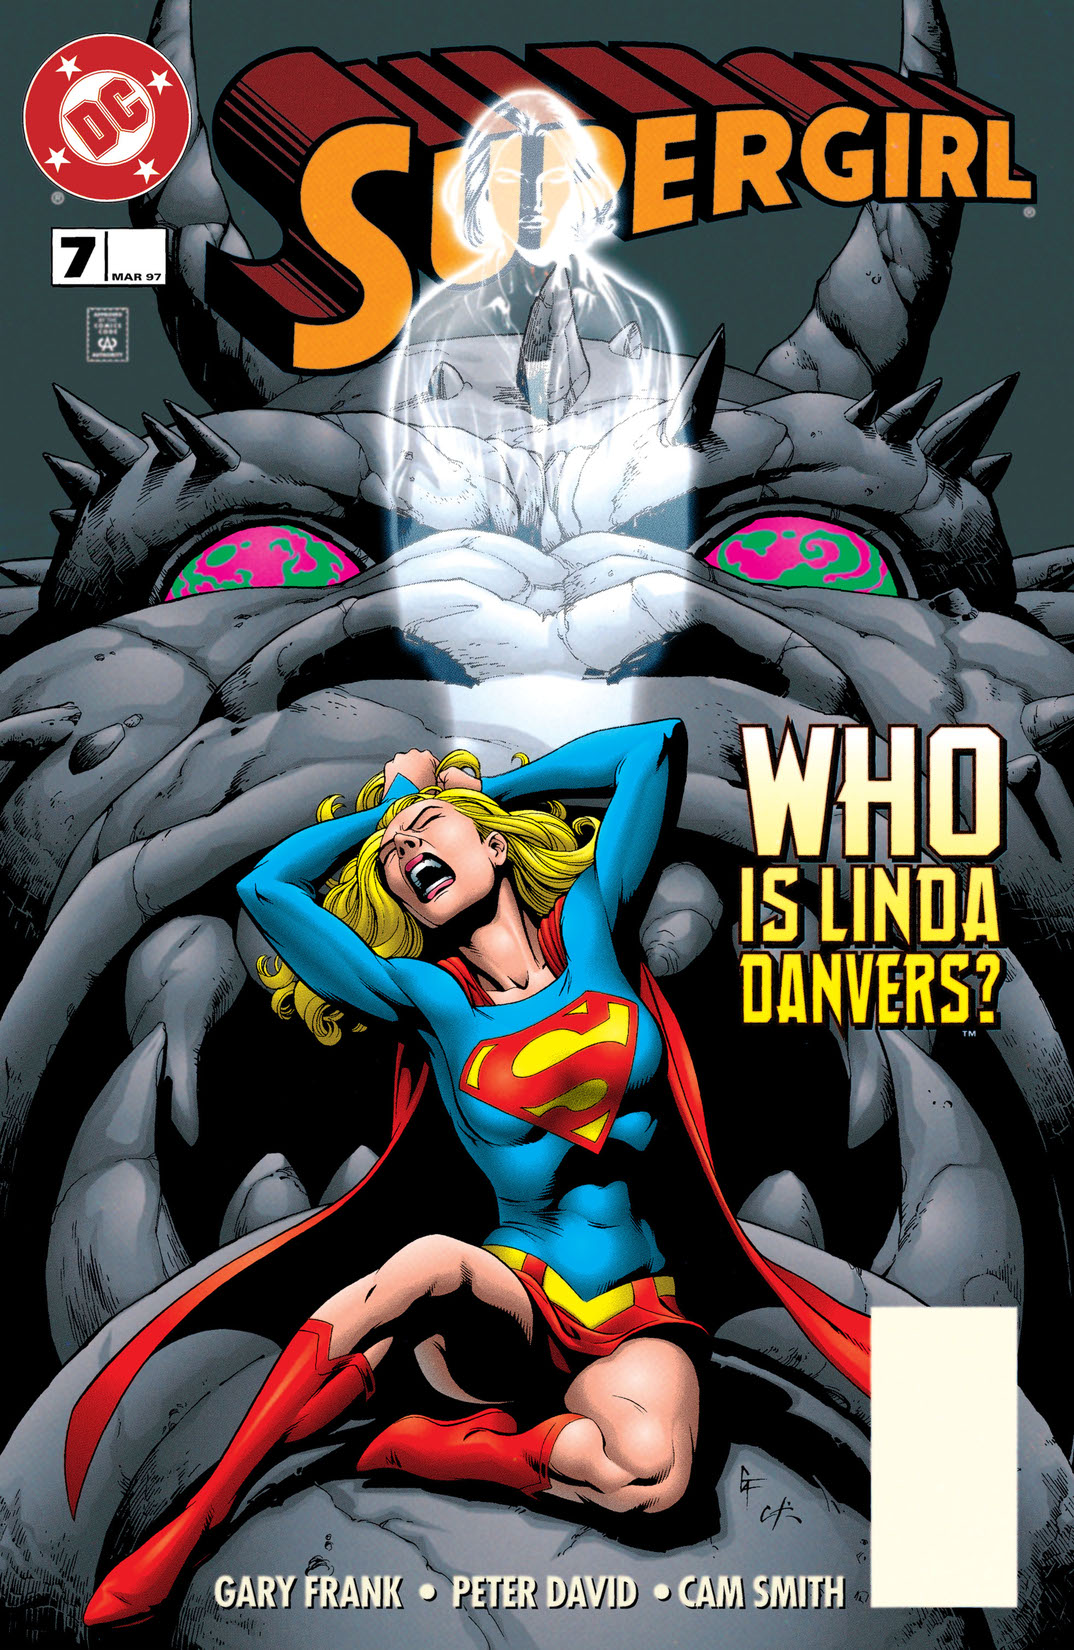 Supergirl (1996-) #7 preview images